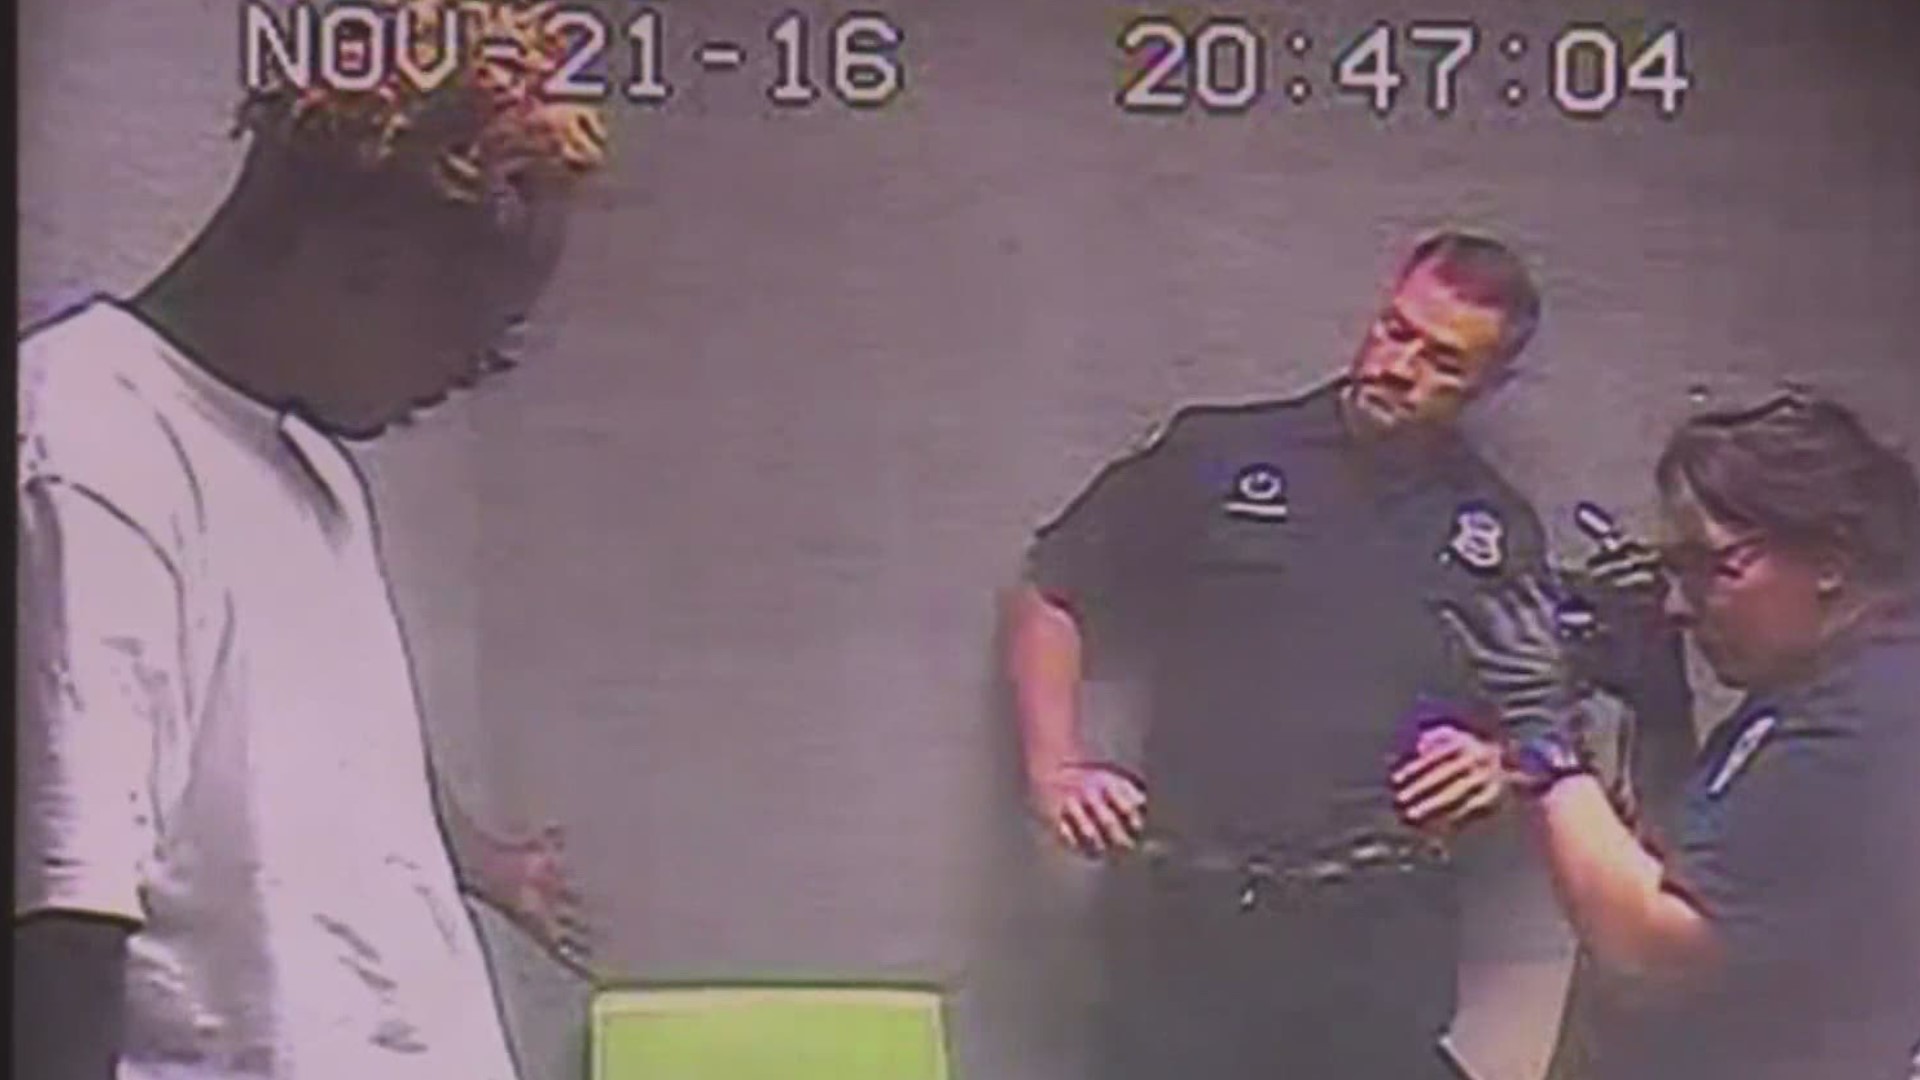 The jury watched video footage of investigators' interrogation of McKane after his 2016 arrest.